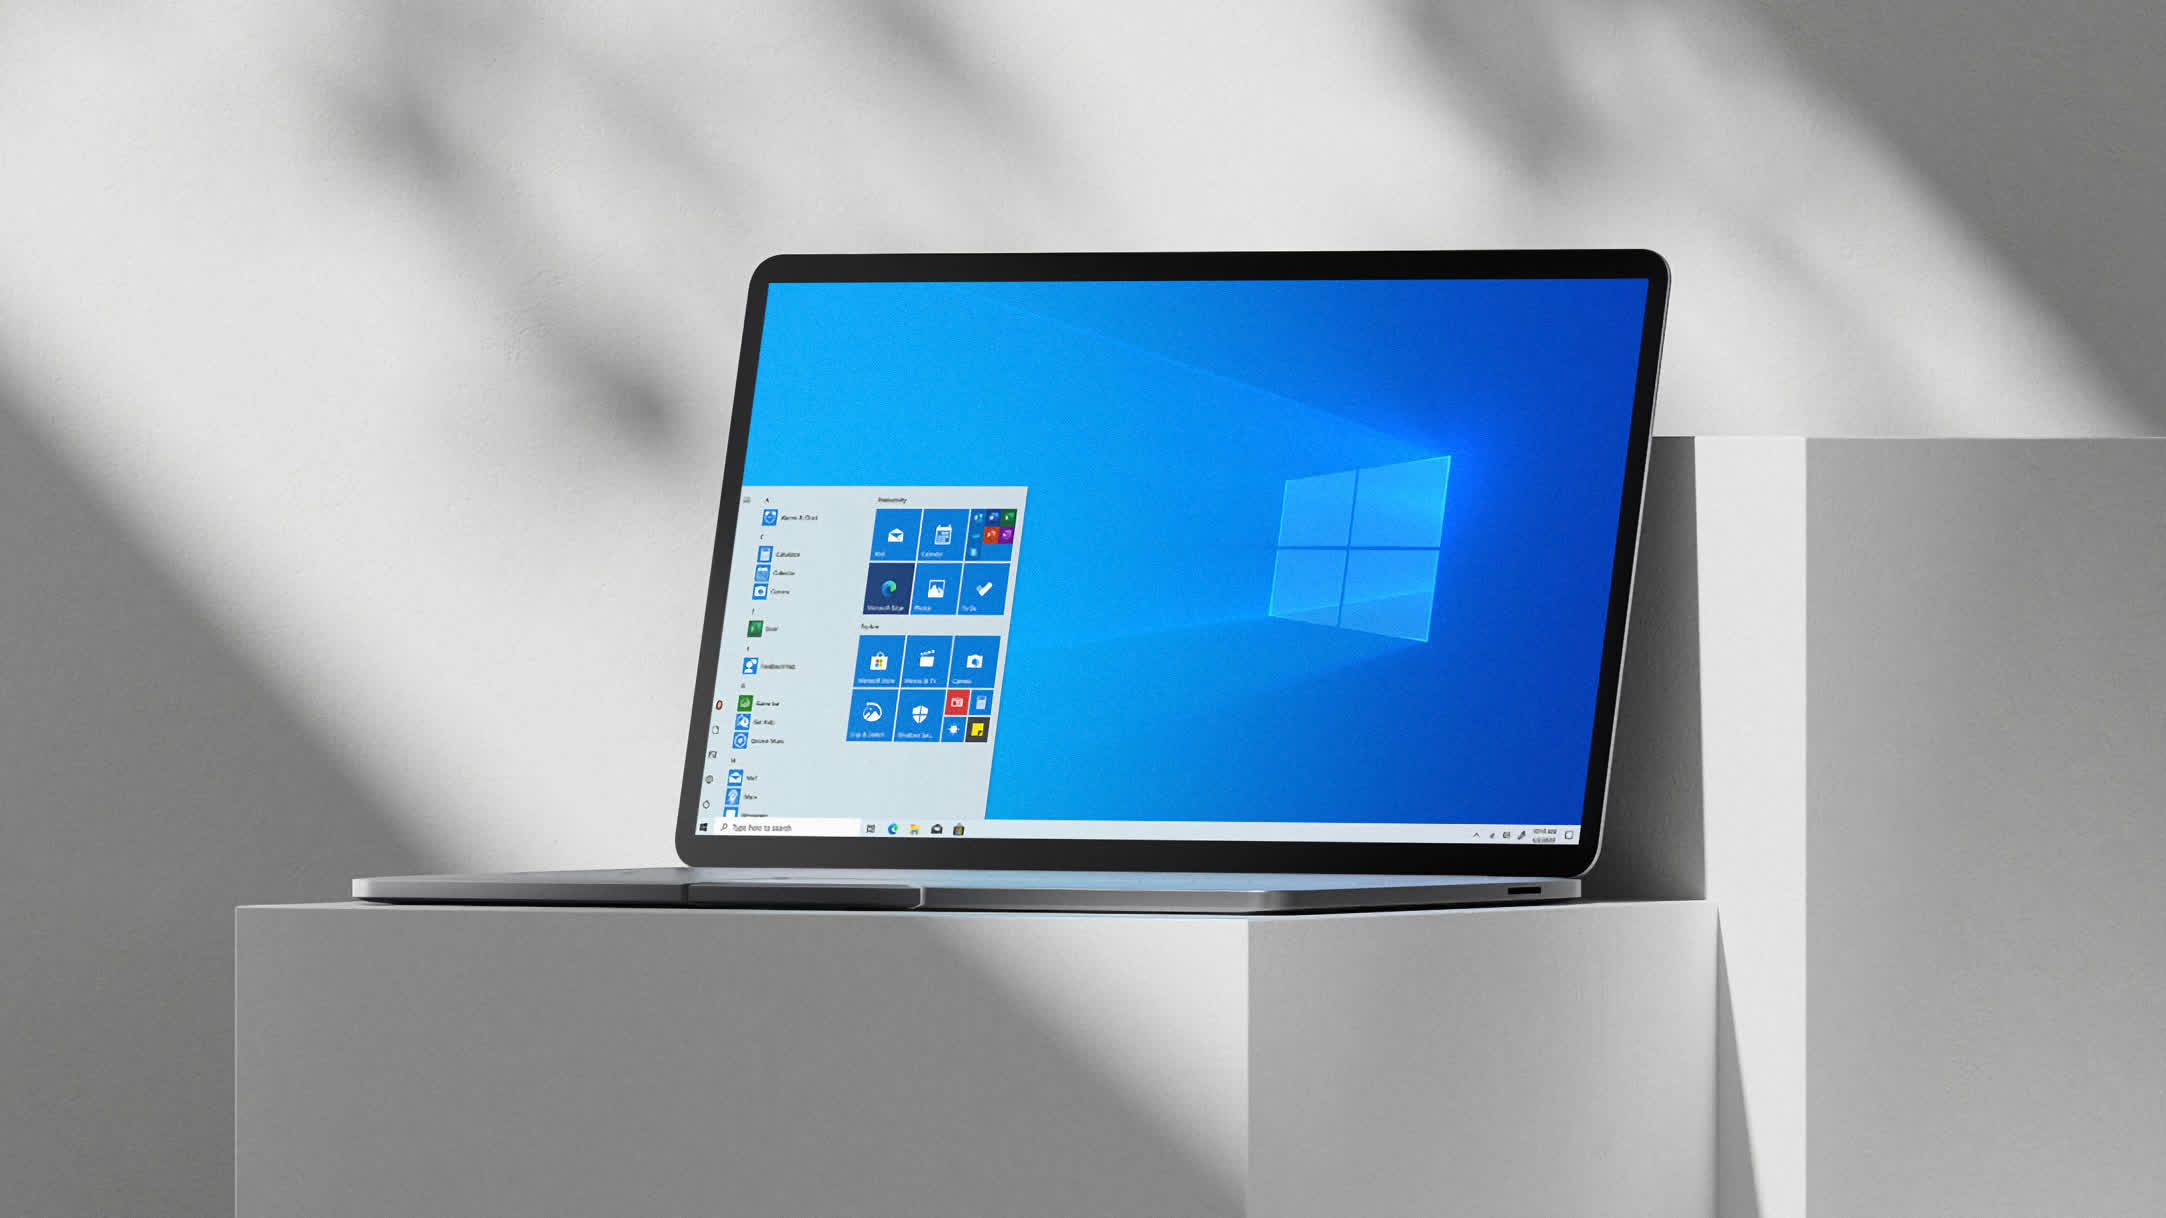 Windows 10 is not getting any more feature updates